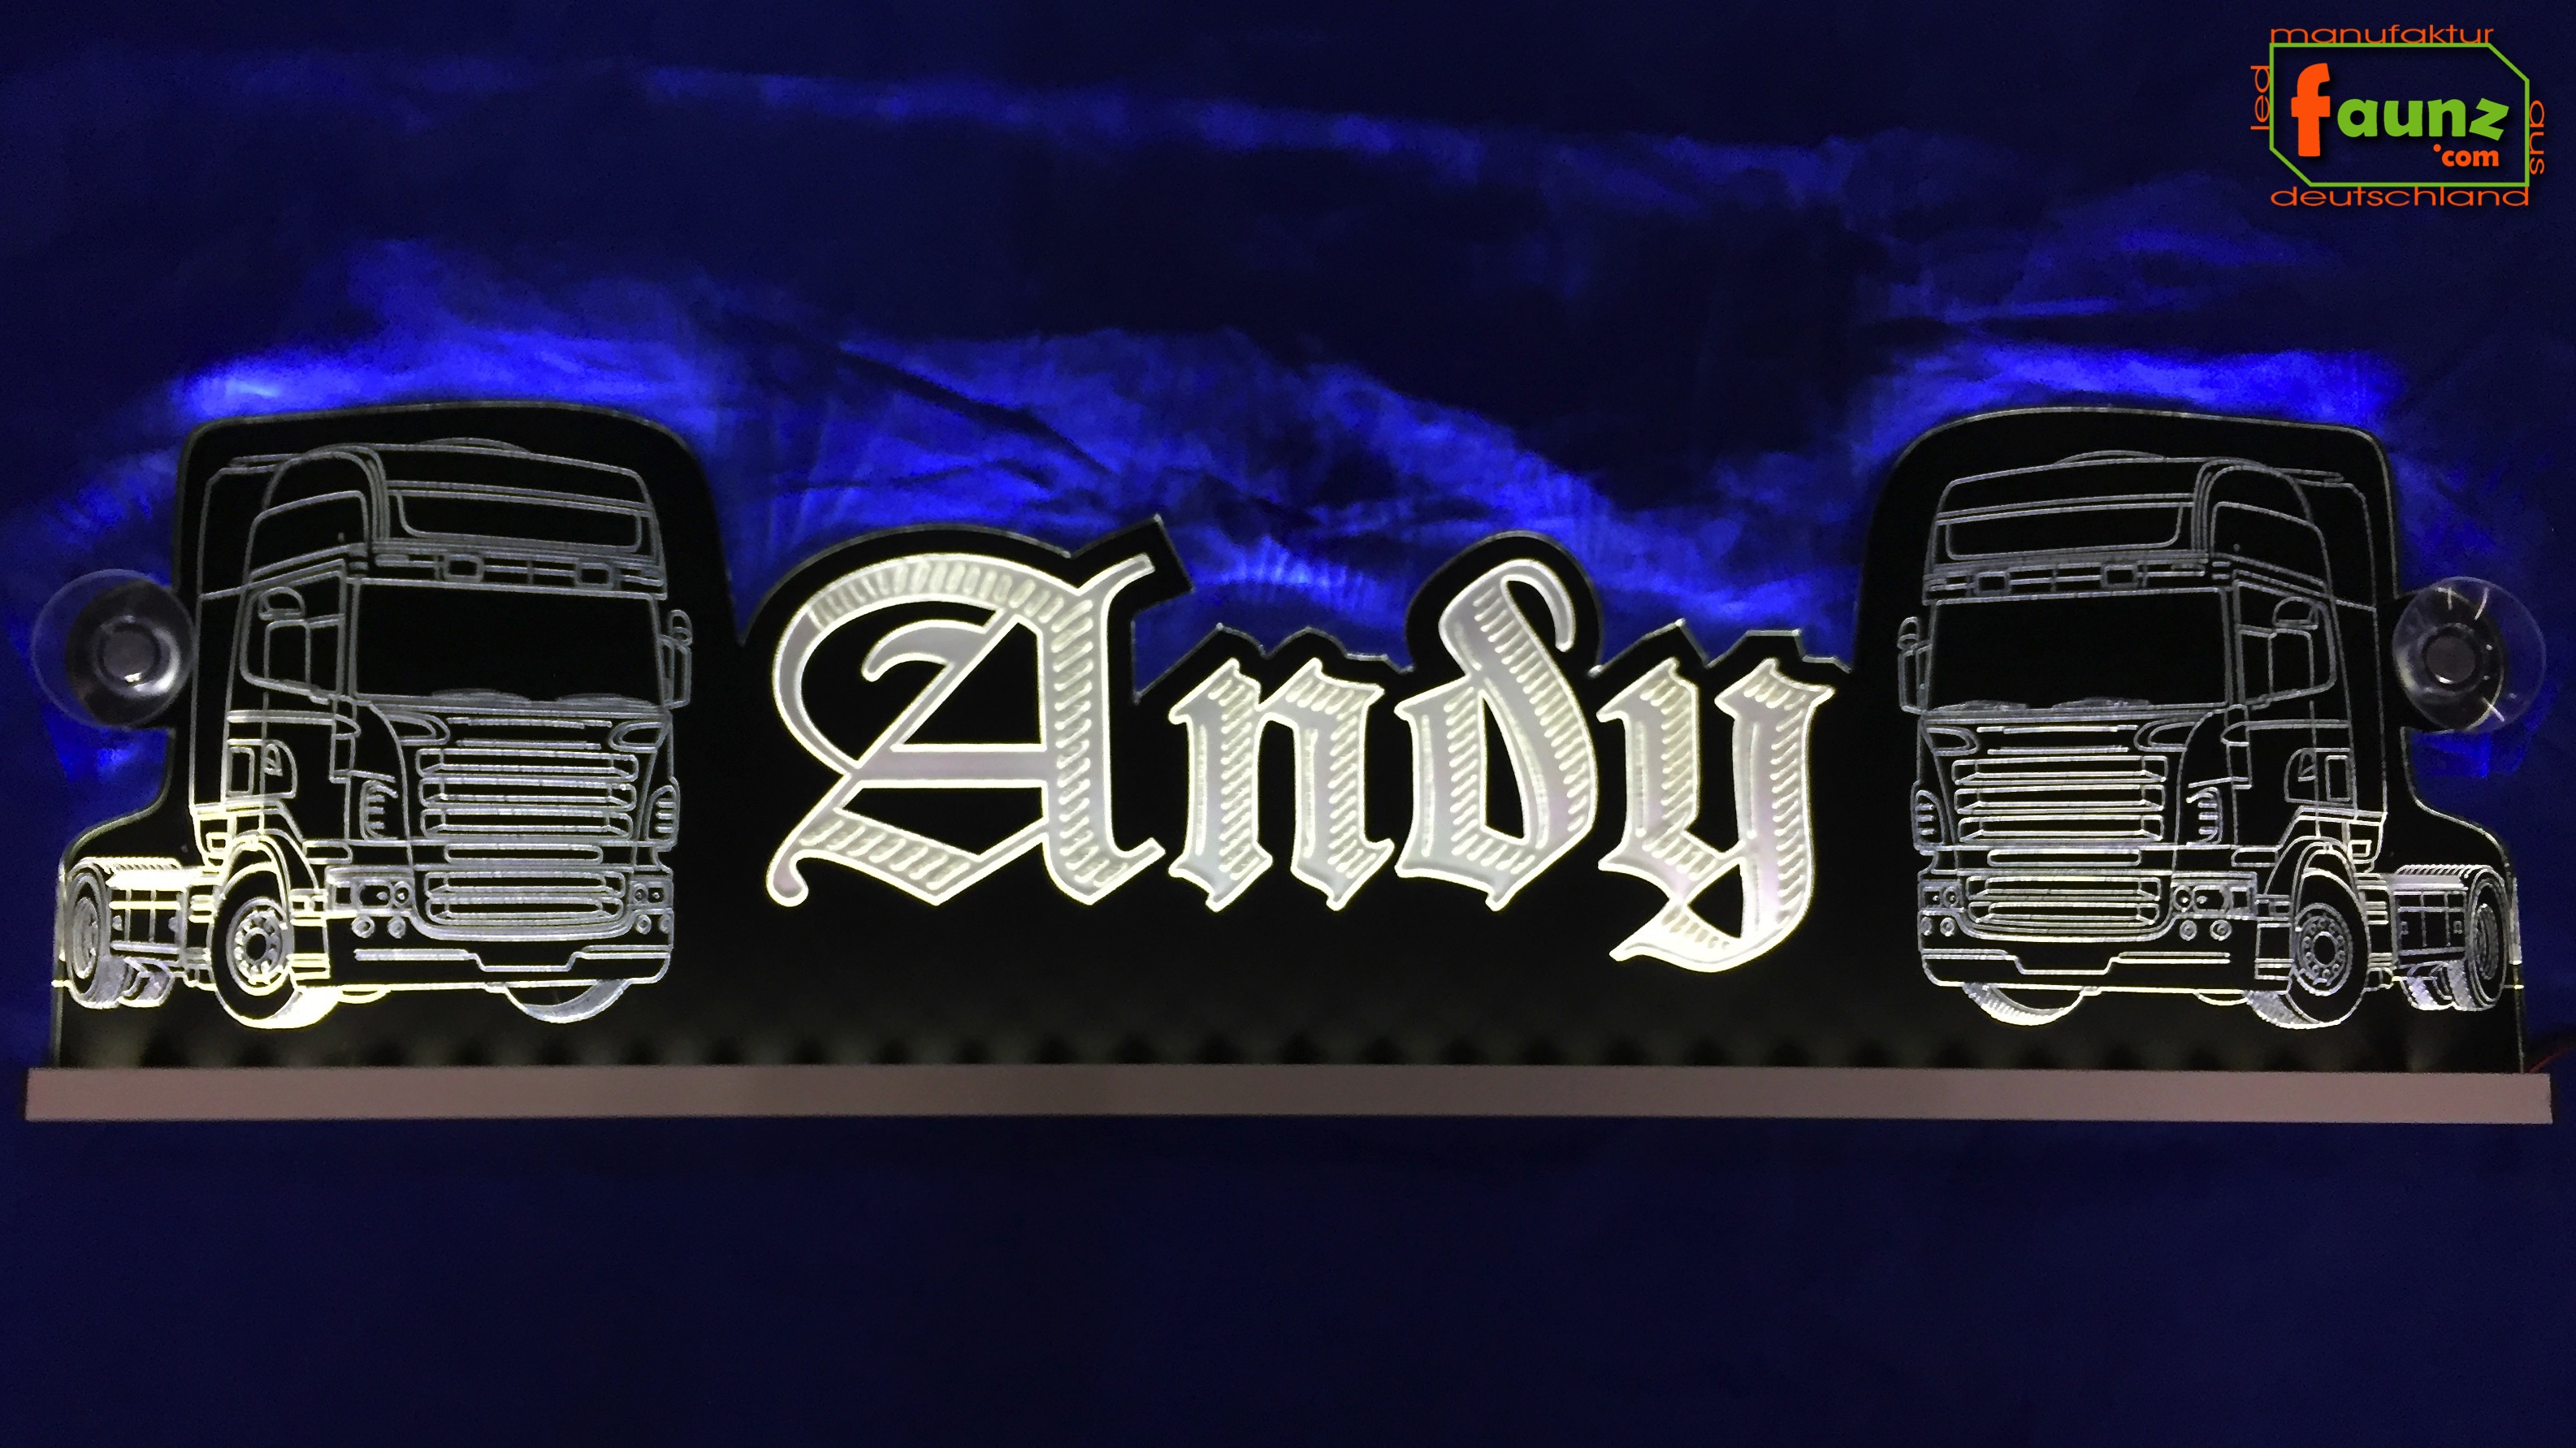 https://www.faunz.com/images/product_images/original_images/andy_fs_truck_500.jpg